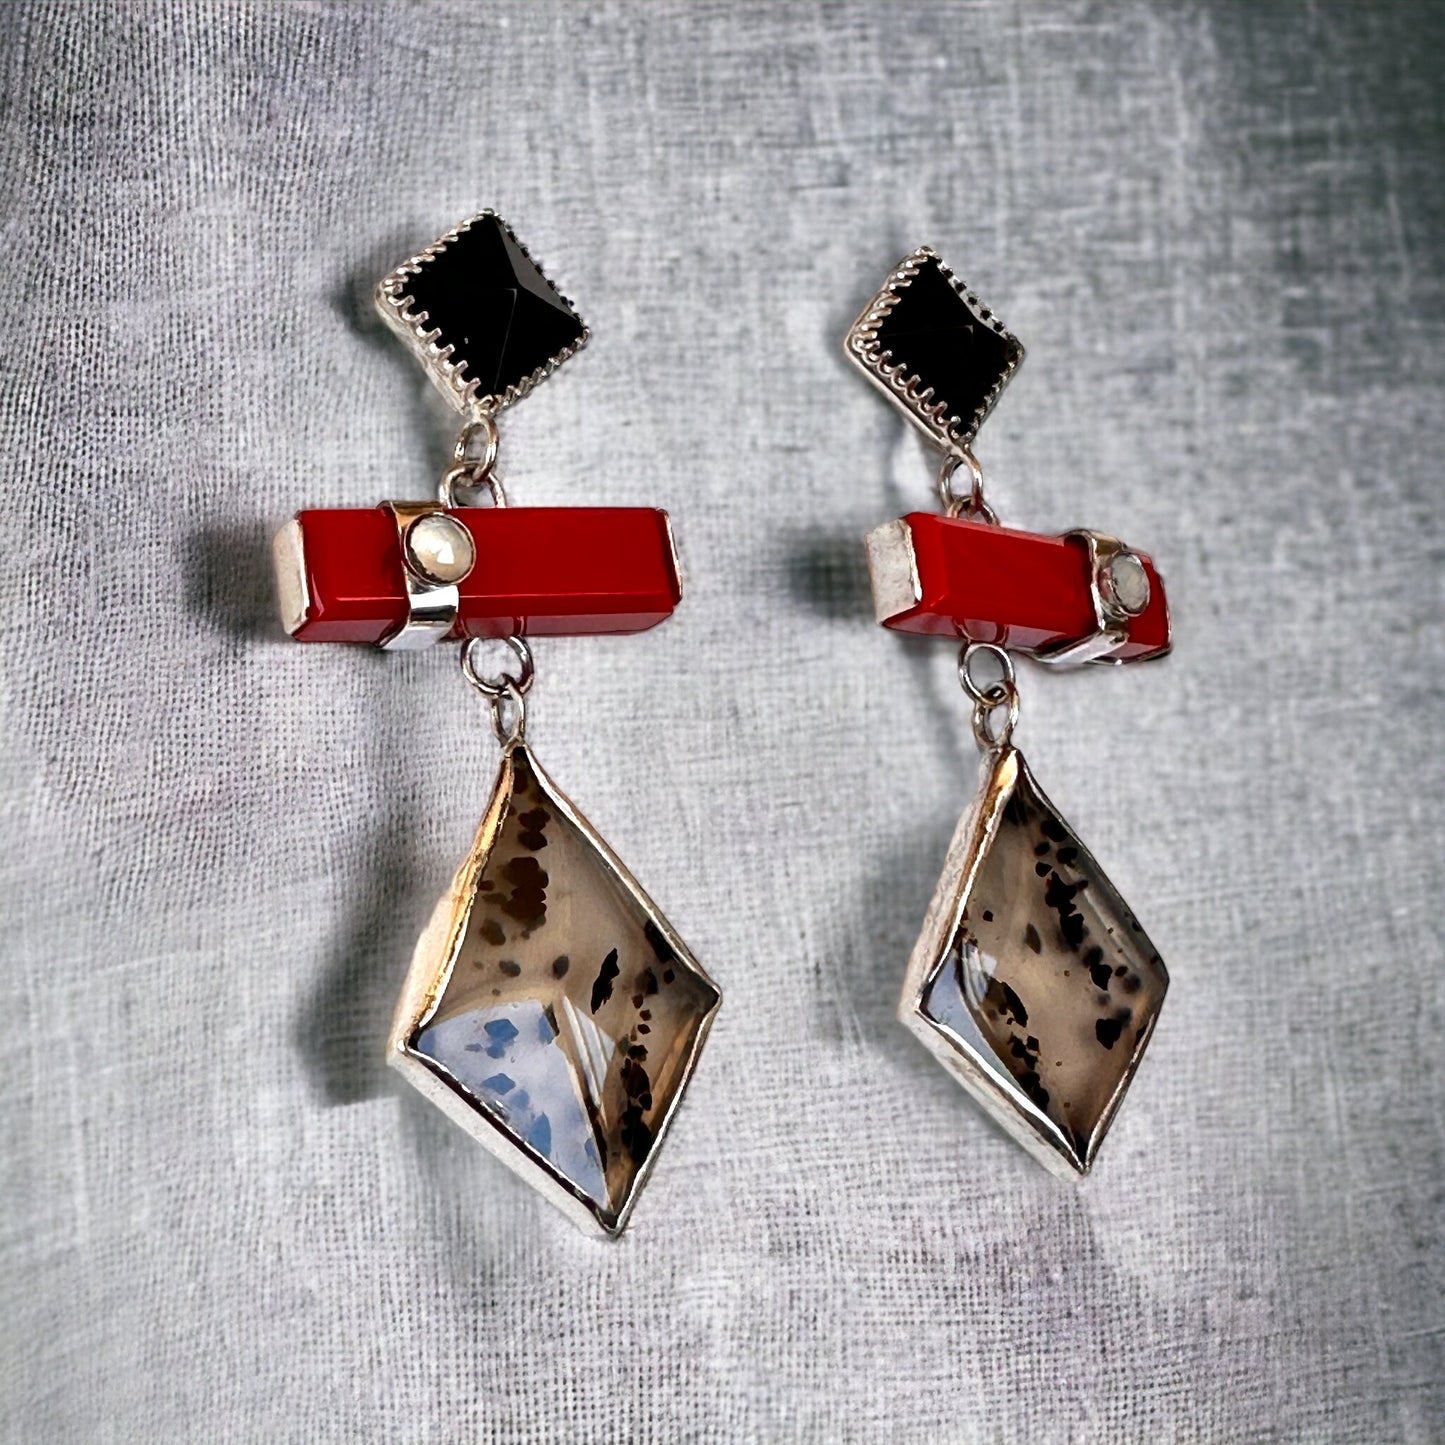 Red, Black and White Geometric Sterling silver earrings